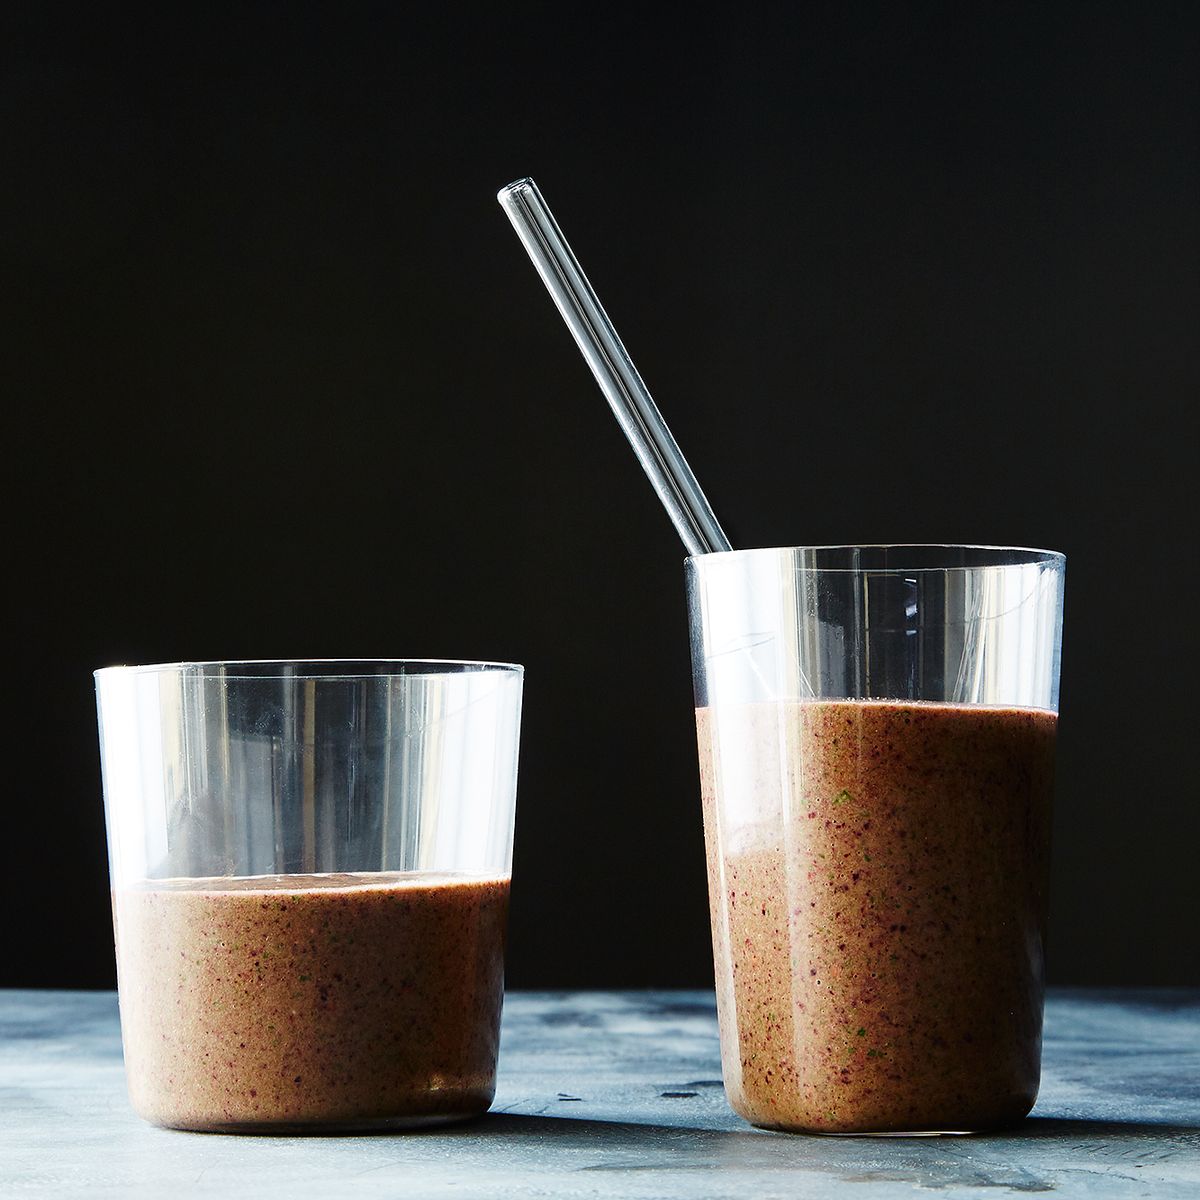 How to Make the Best Smoothie Without a Recipe